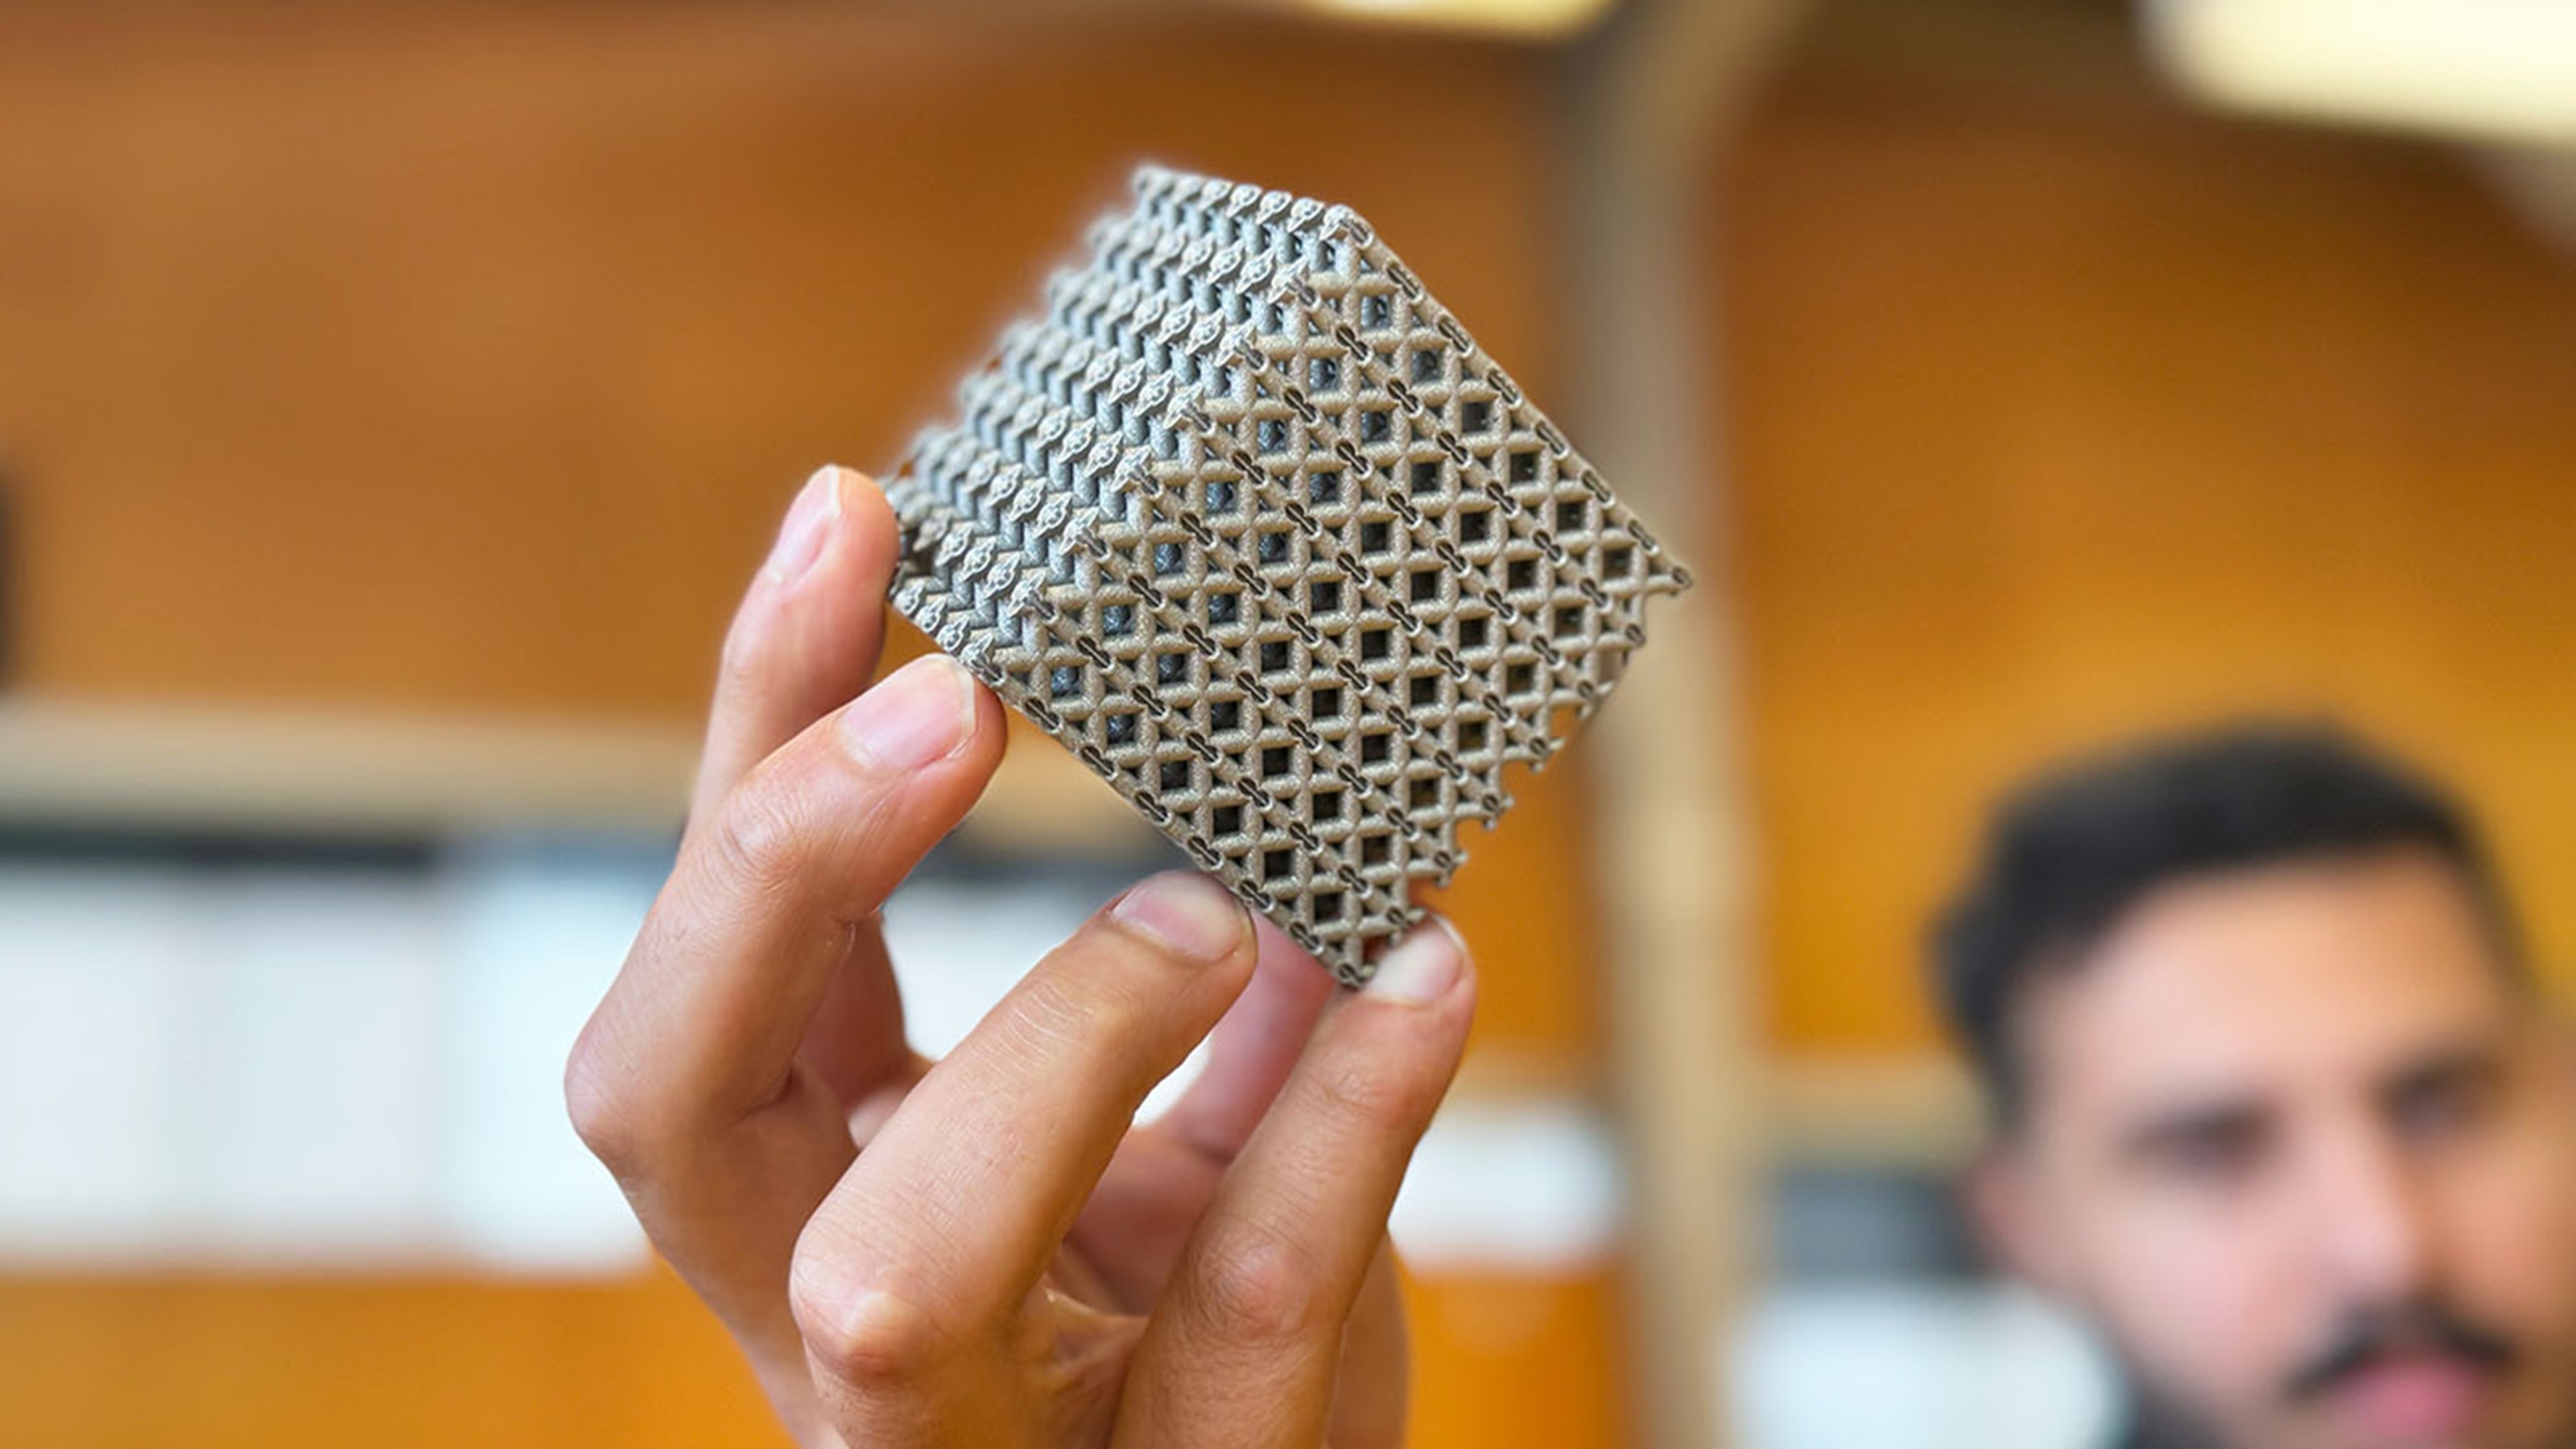 A person holding a complex metallic lattice structure in focus, with a blurred individual in the background.